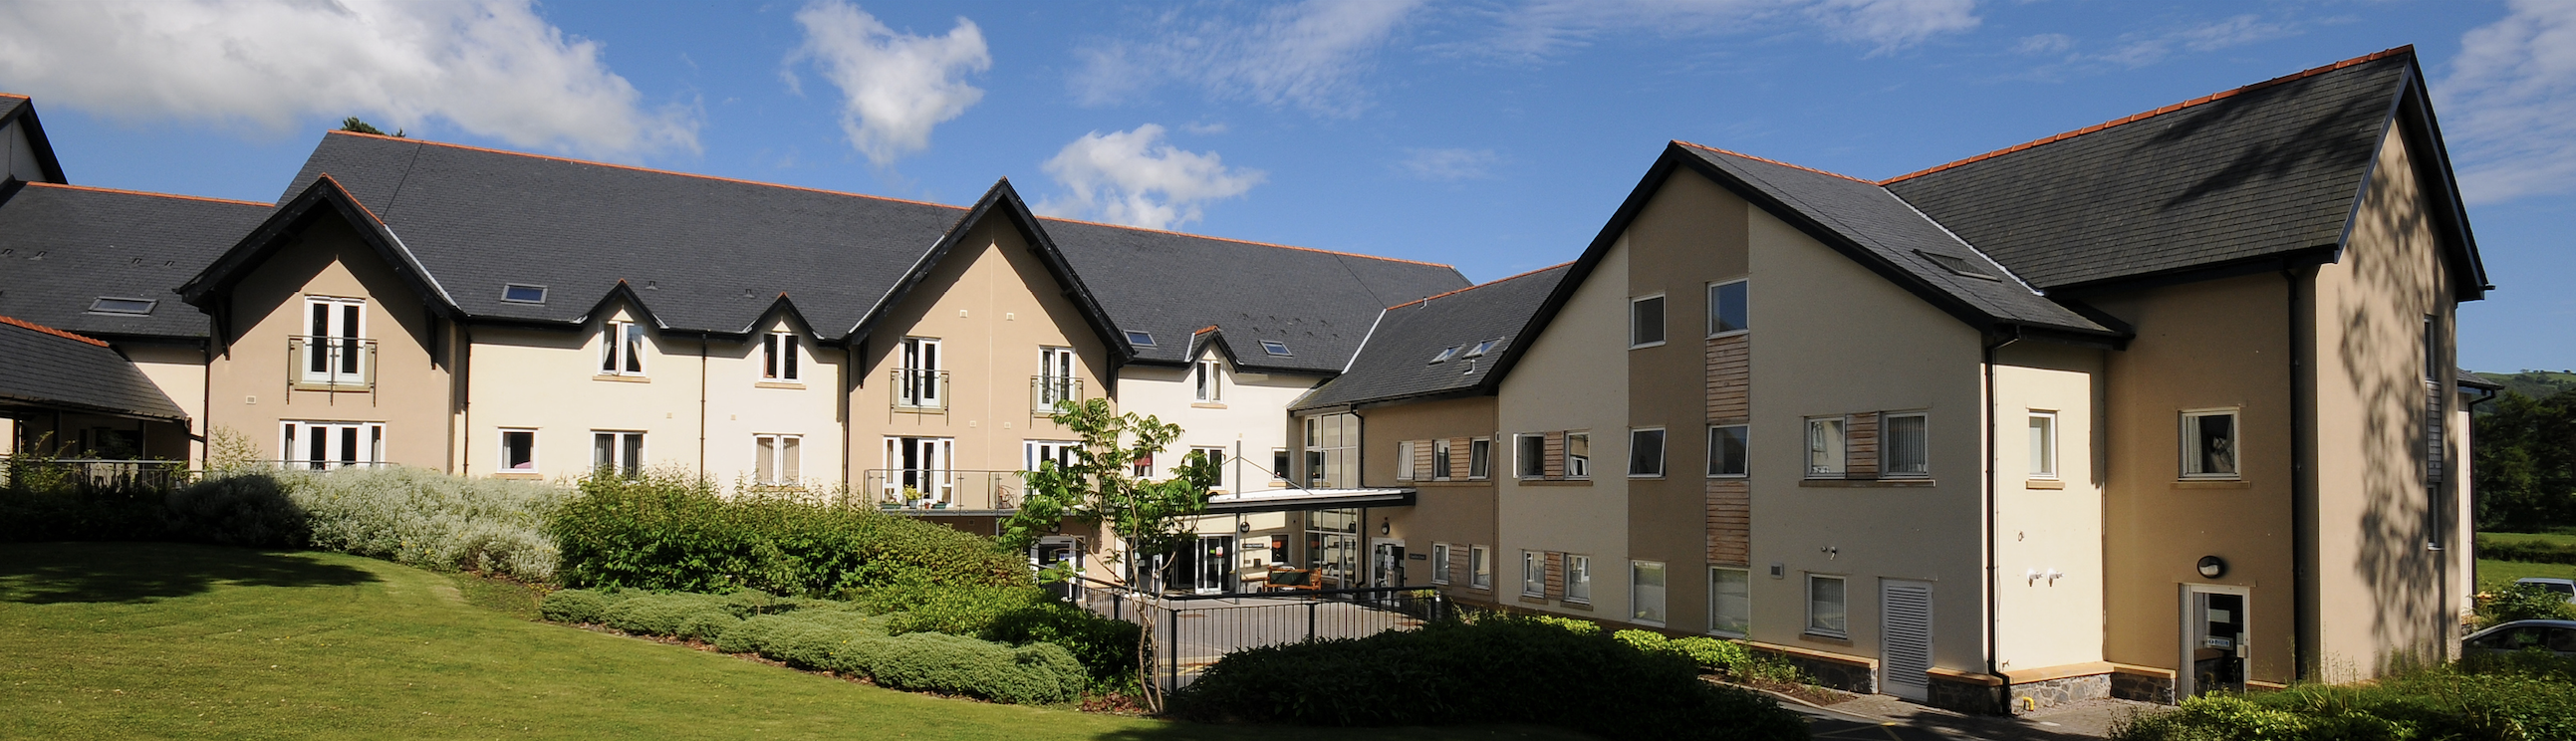 Discover independent living at Hafan Gwydir’s Open Day, hosted by ClwydAlyn Housing